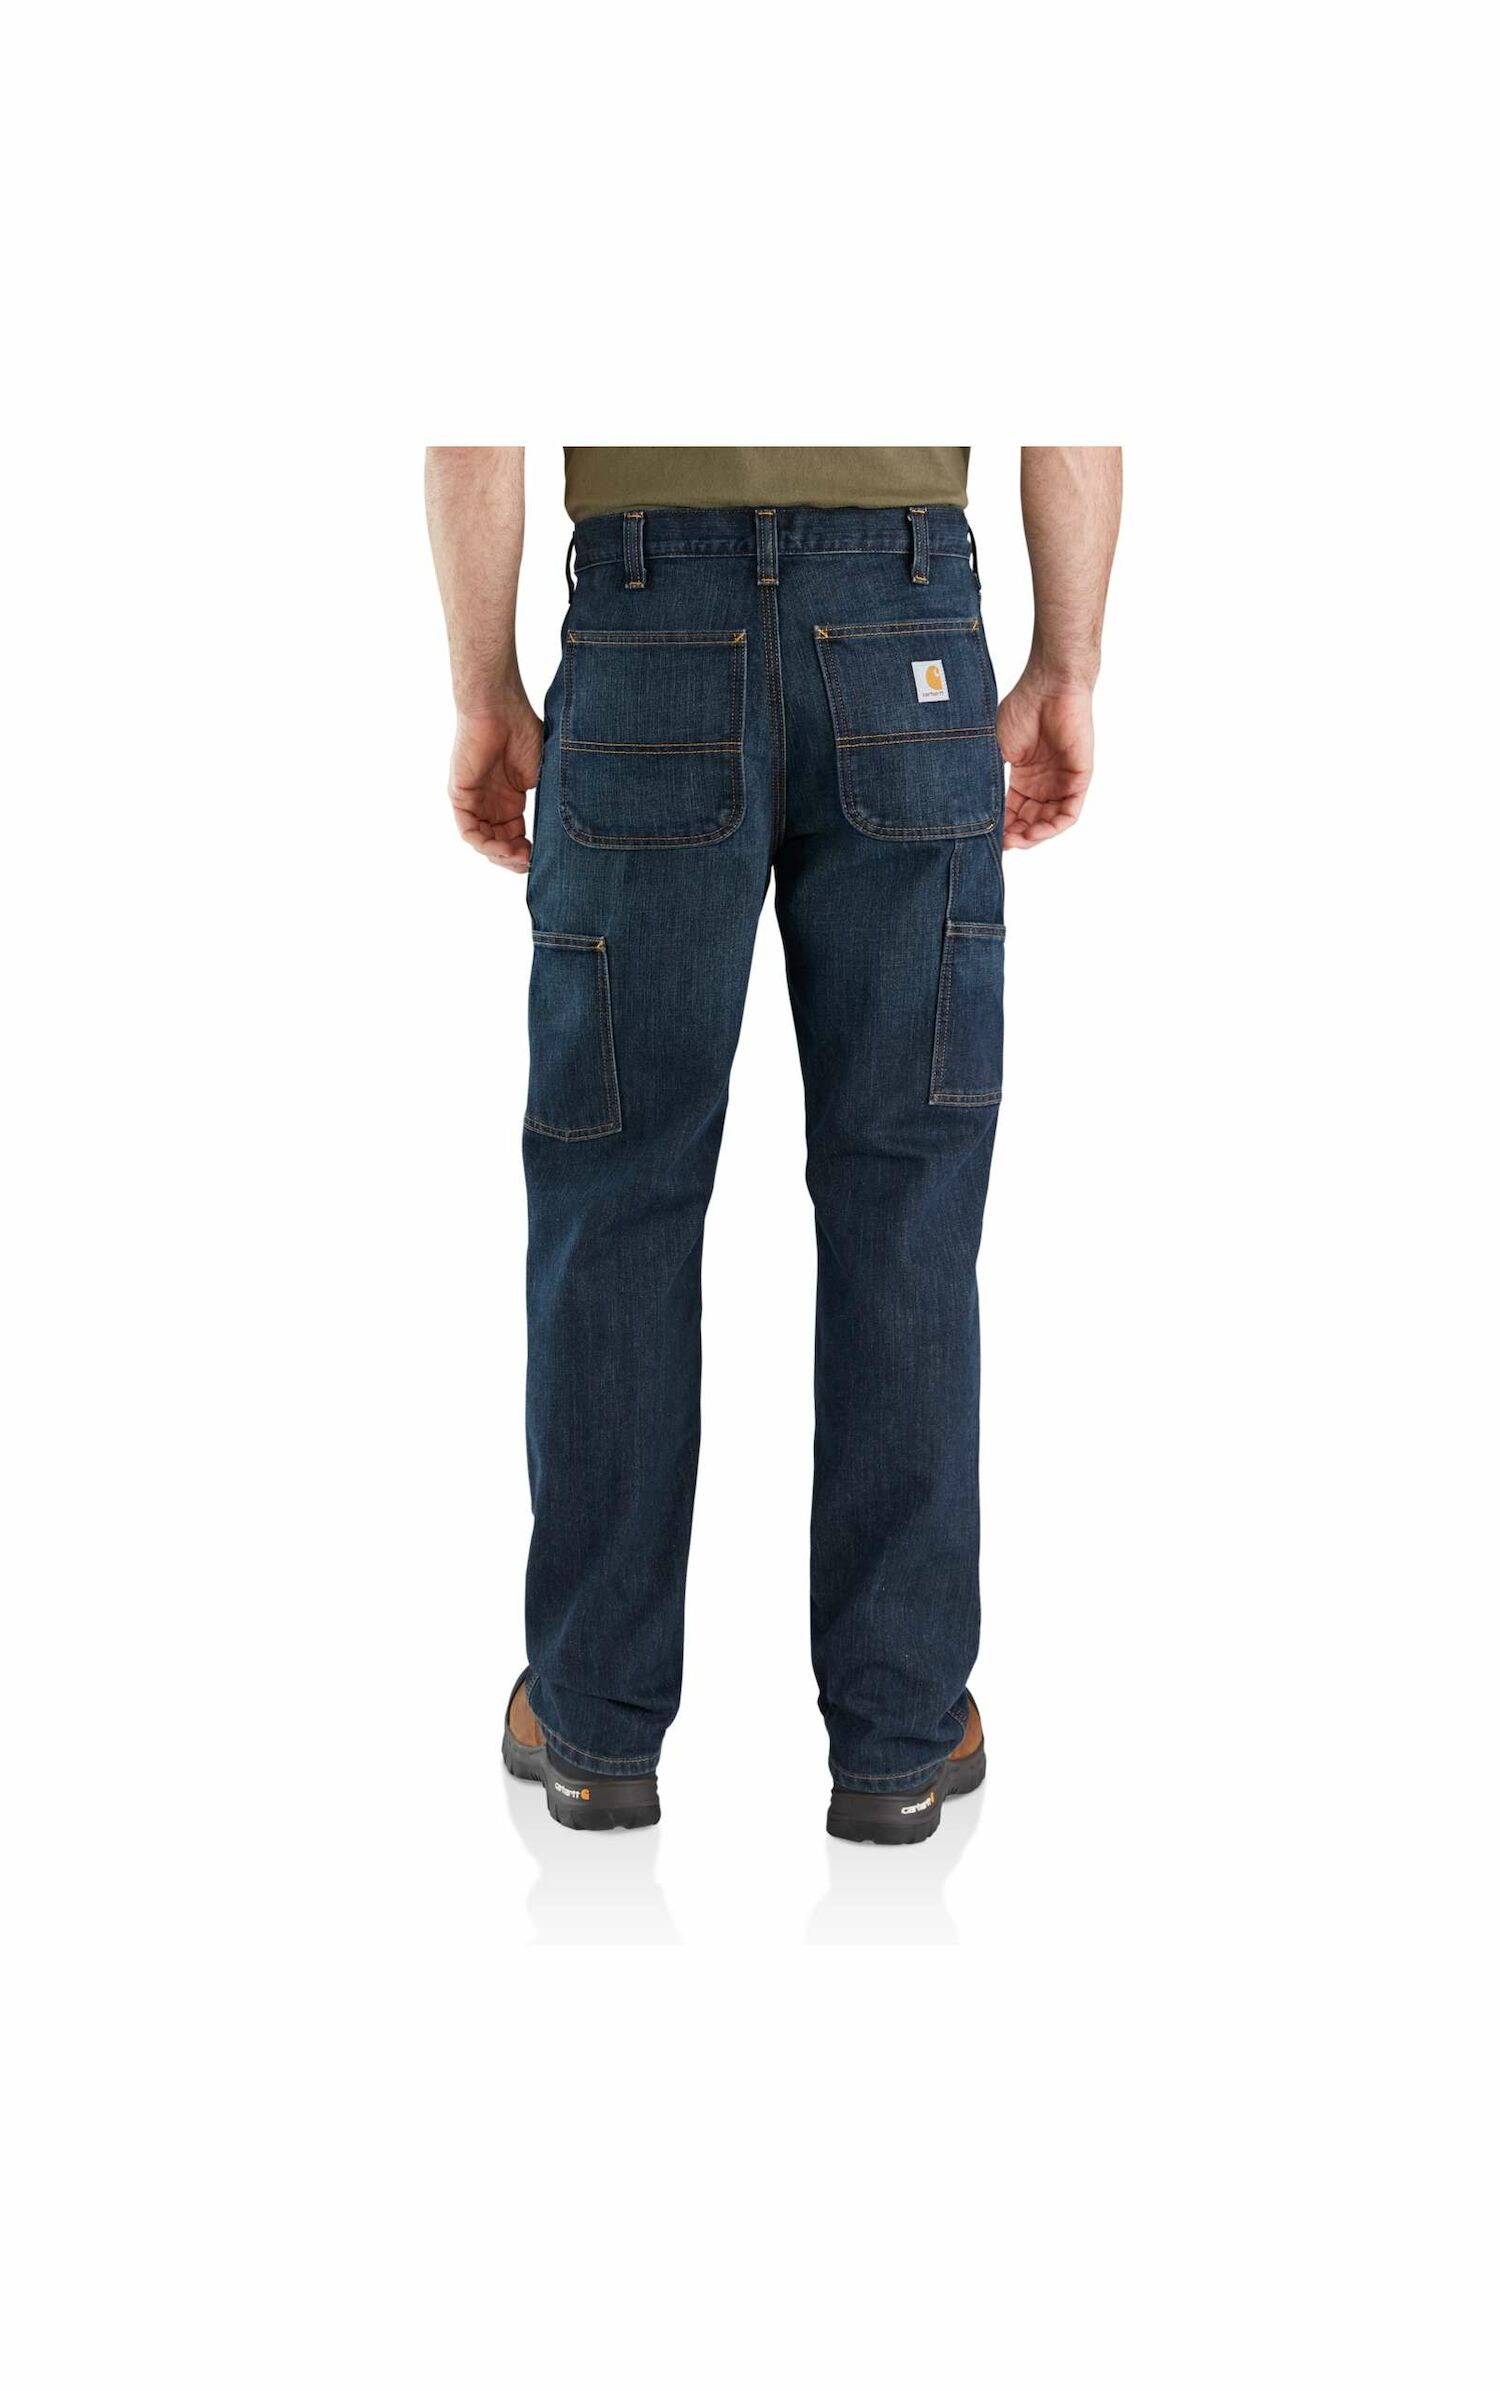 Carhartt Men's Relaxed Fit Holter Dungaree 